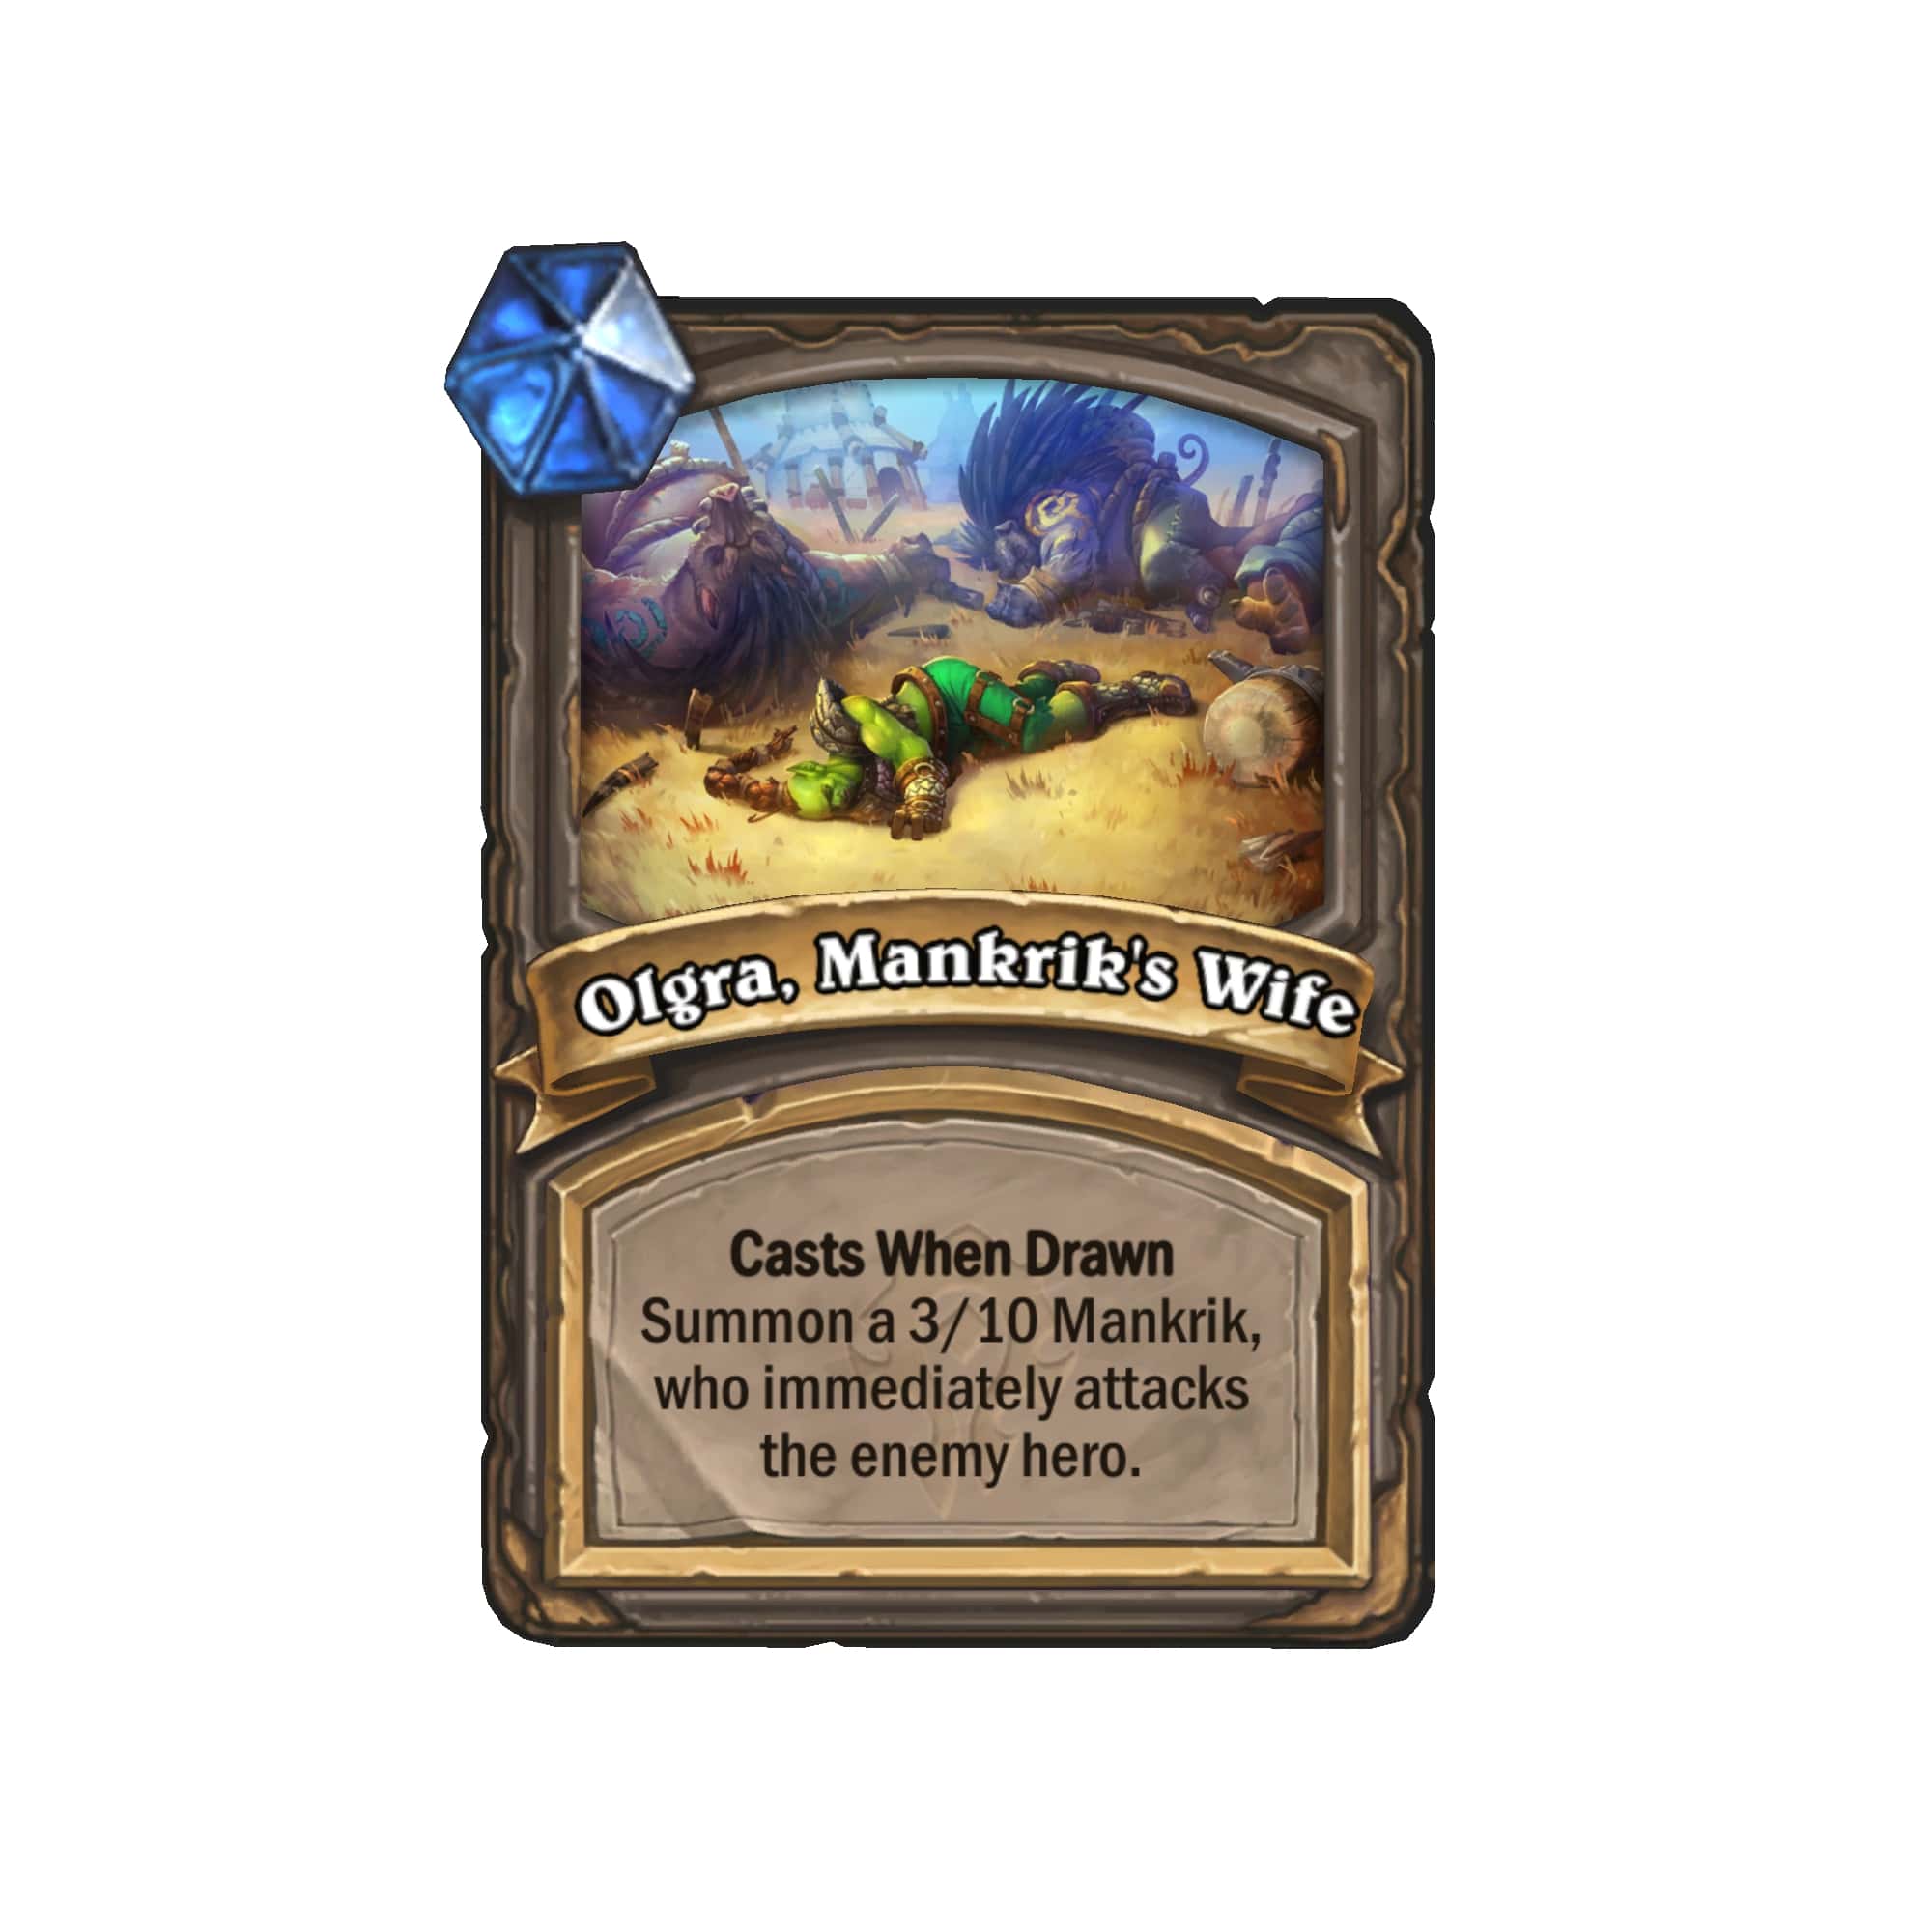 A card from Hearthstone's Forged in the Barrens set